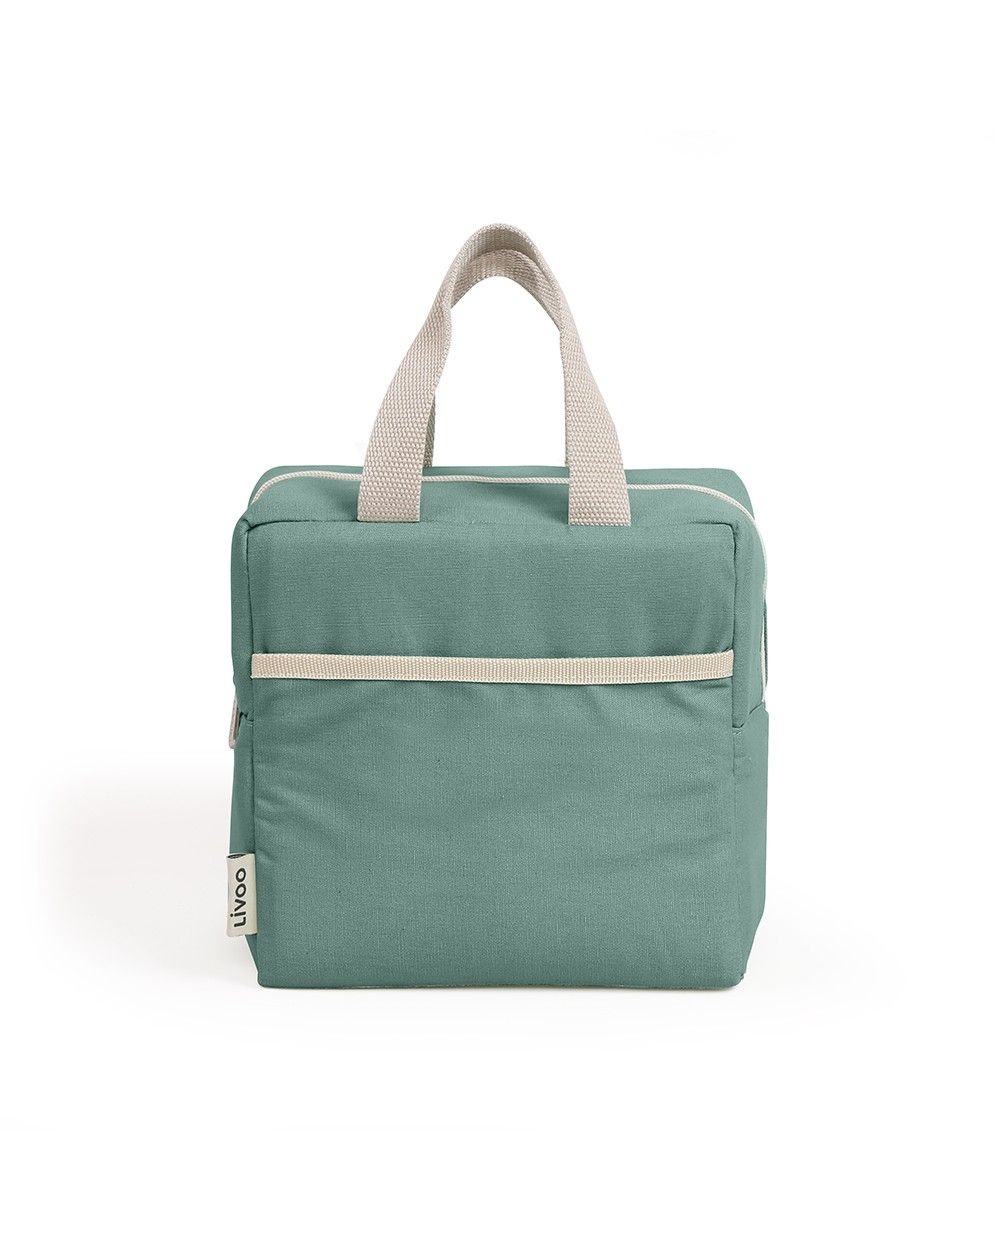 Sac isotherme vert pour lunch box